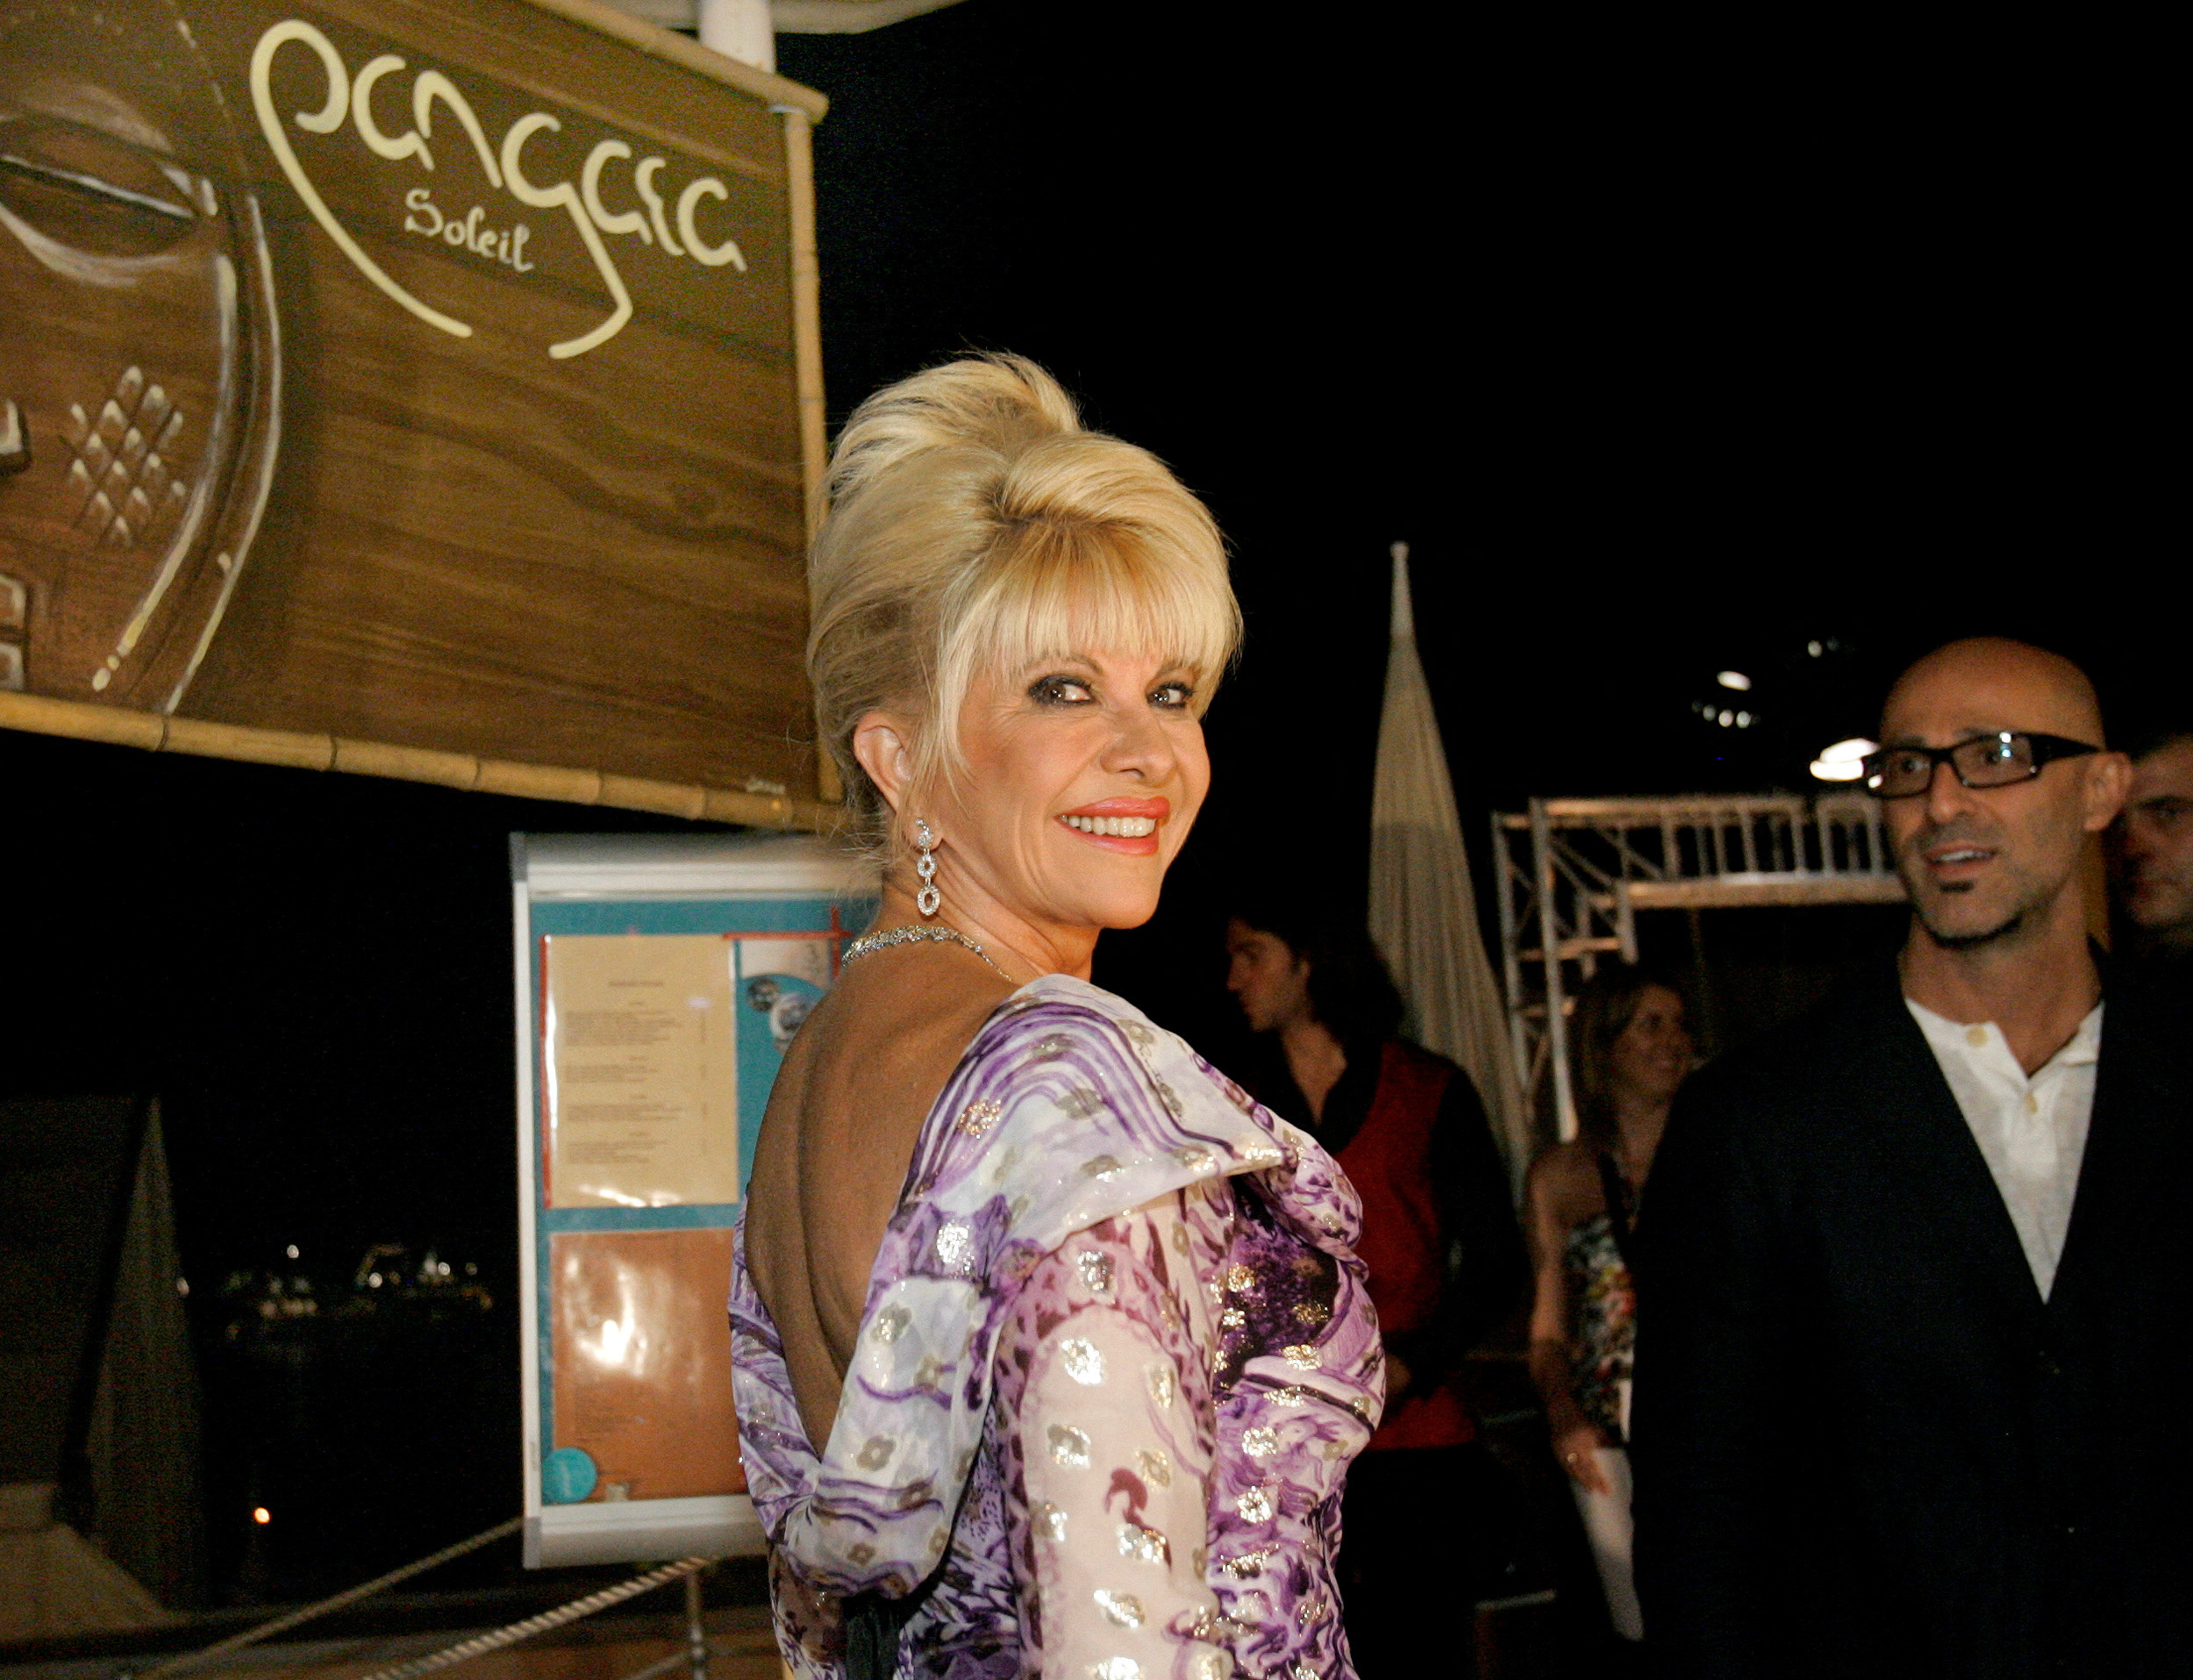 Ivana Trump arrives at her belated birthday party at the Pangaea Soleil club in Cannes